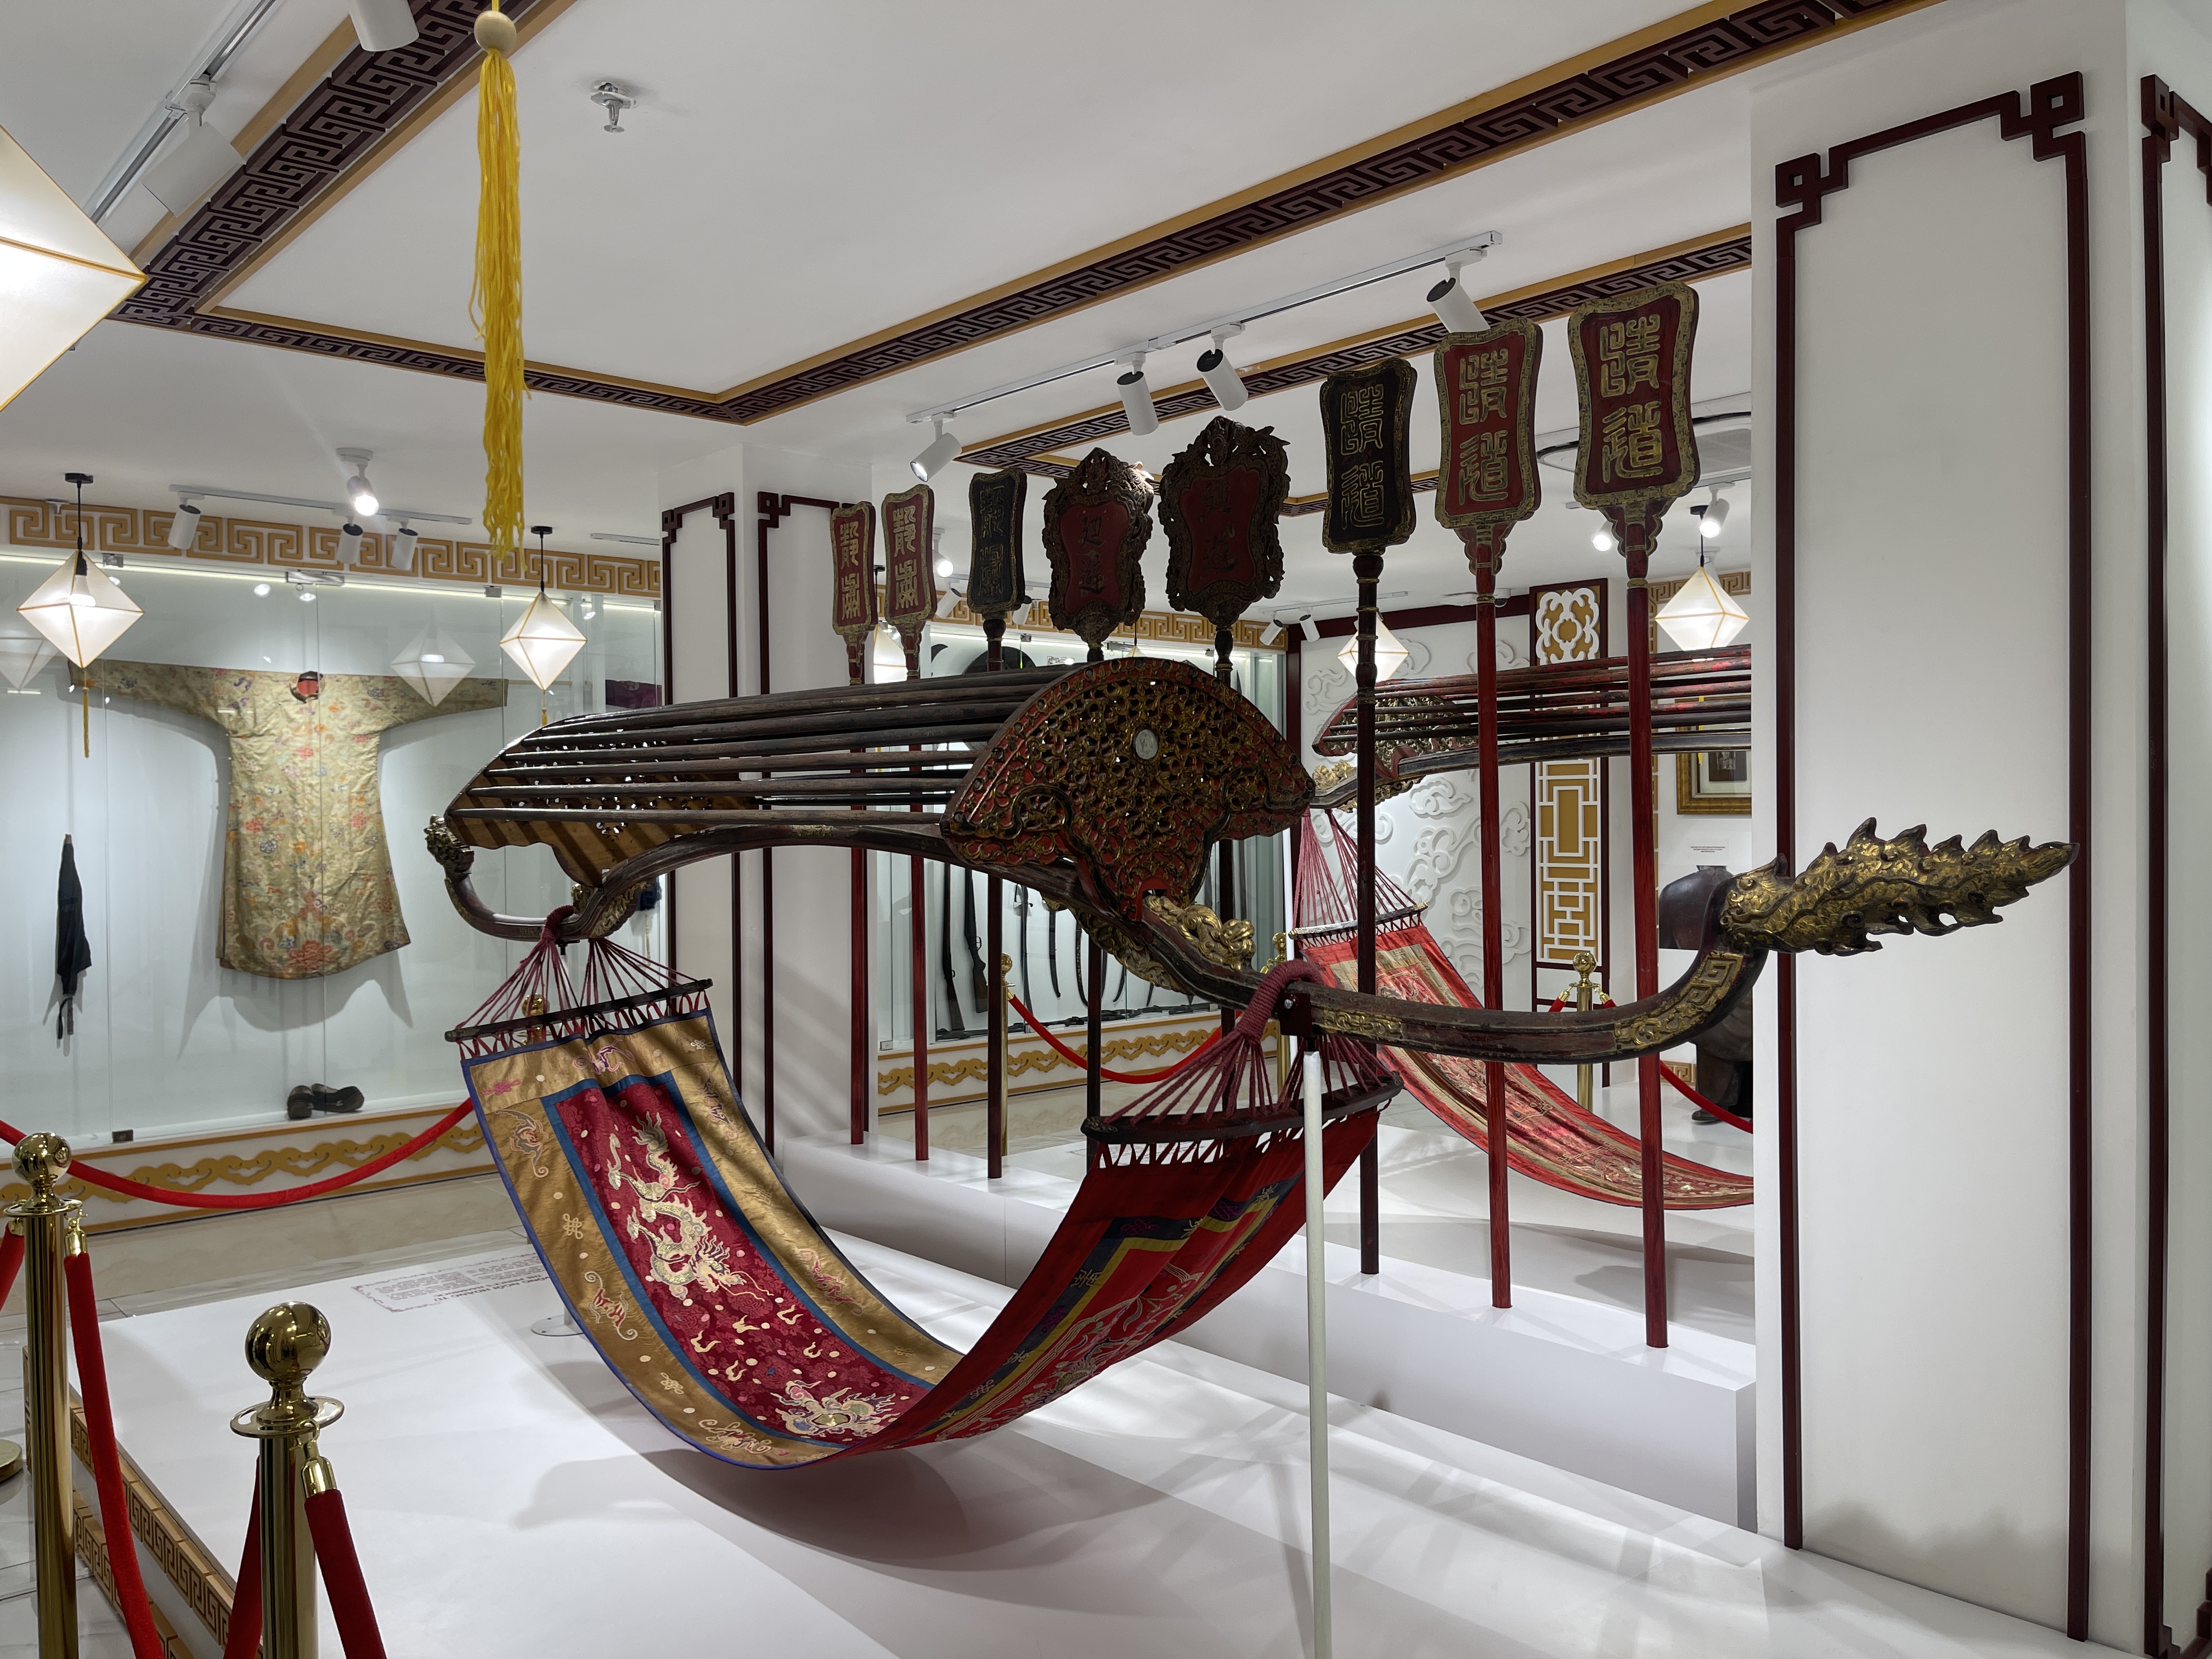 A hammock for a prince from the Nguyen Dynasty is displayed at the Nguyen Dynasty Artifacts Museum. Photo: Dong Nguyen / Tuoi Tre News